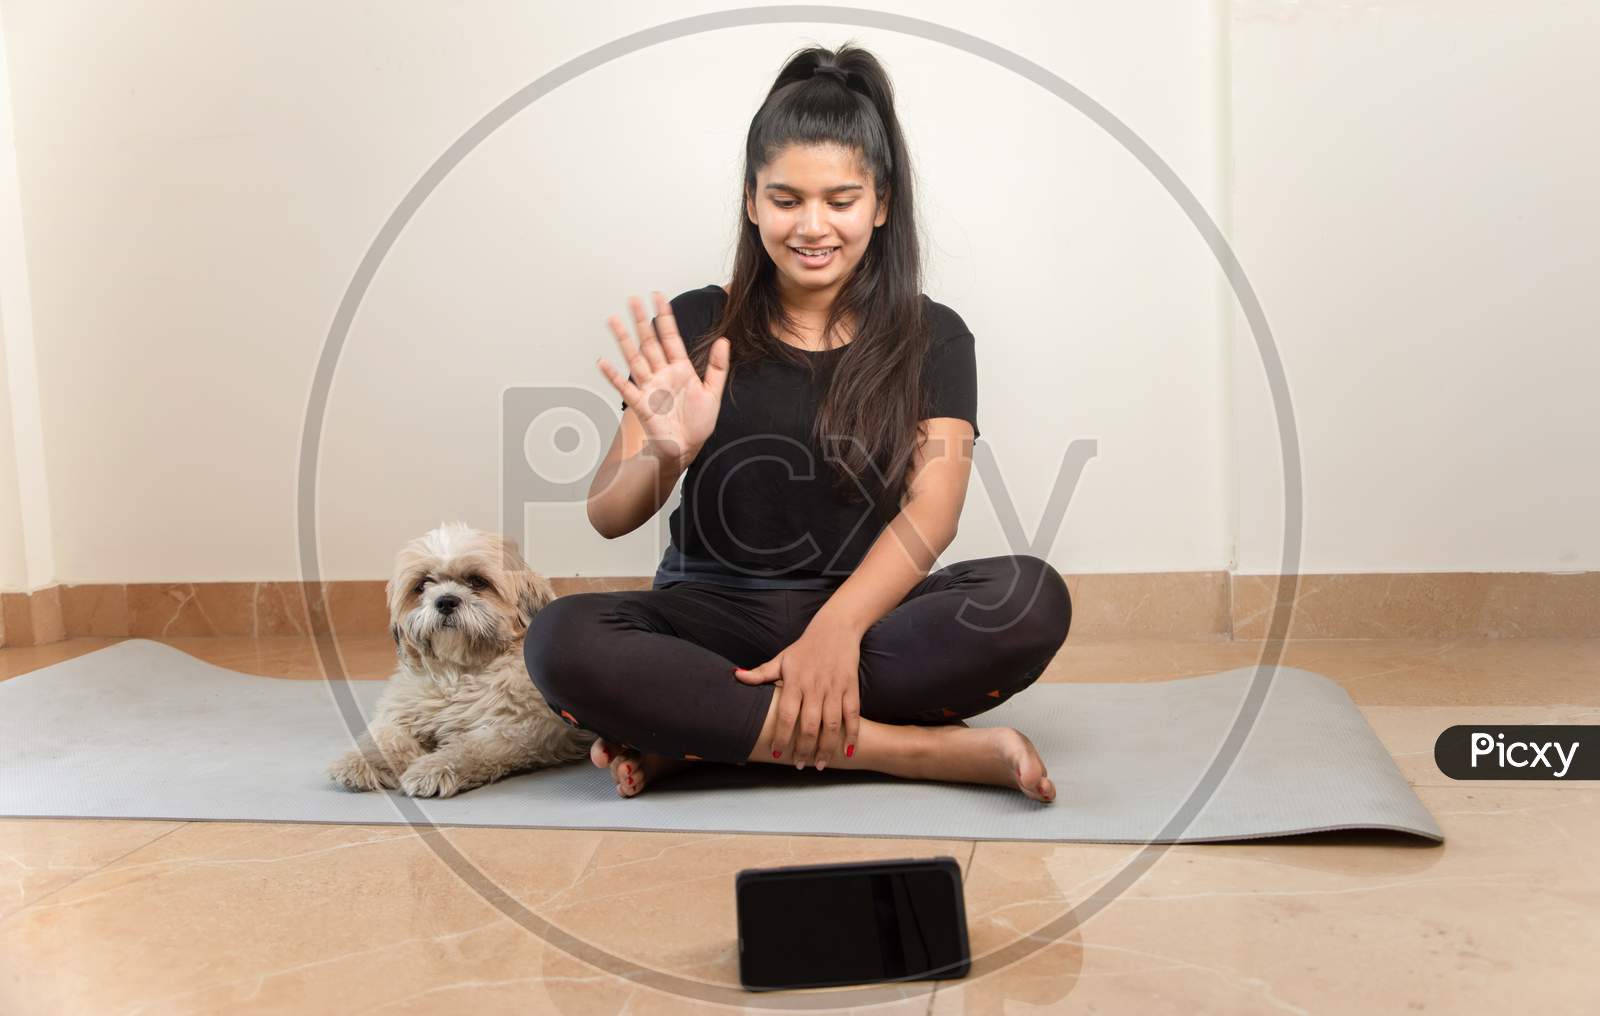 Girl Greeting On Online Class From Mobile Phone For Exercise - Concept Of Online Yoga Live Streaming On A Smartphone - Yoga Trainer Teaching Via Internet From Home.